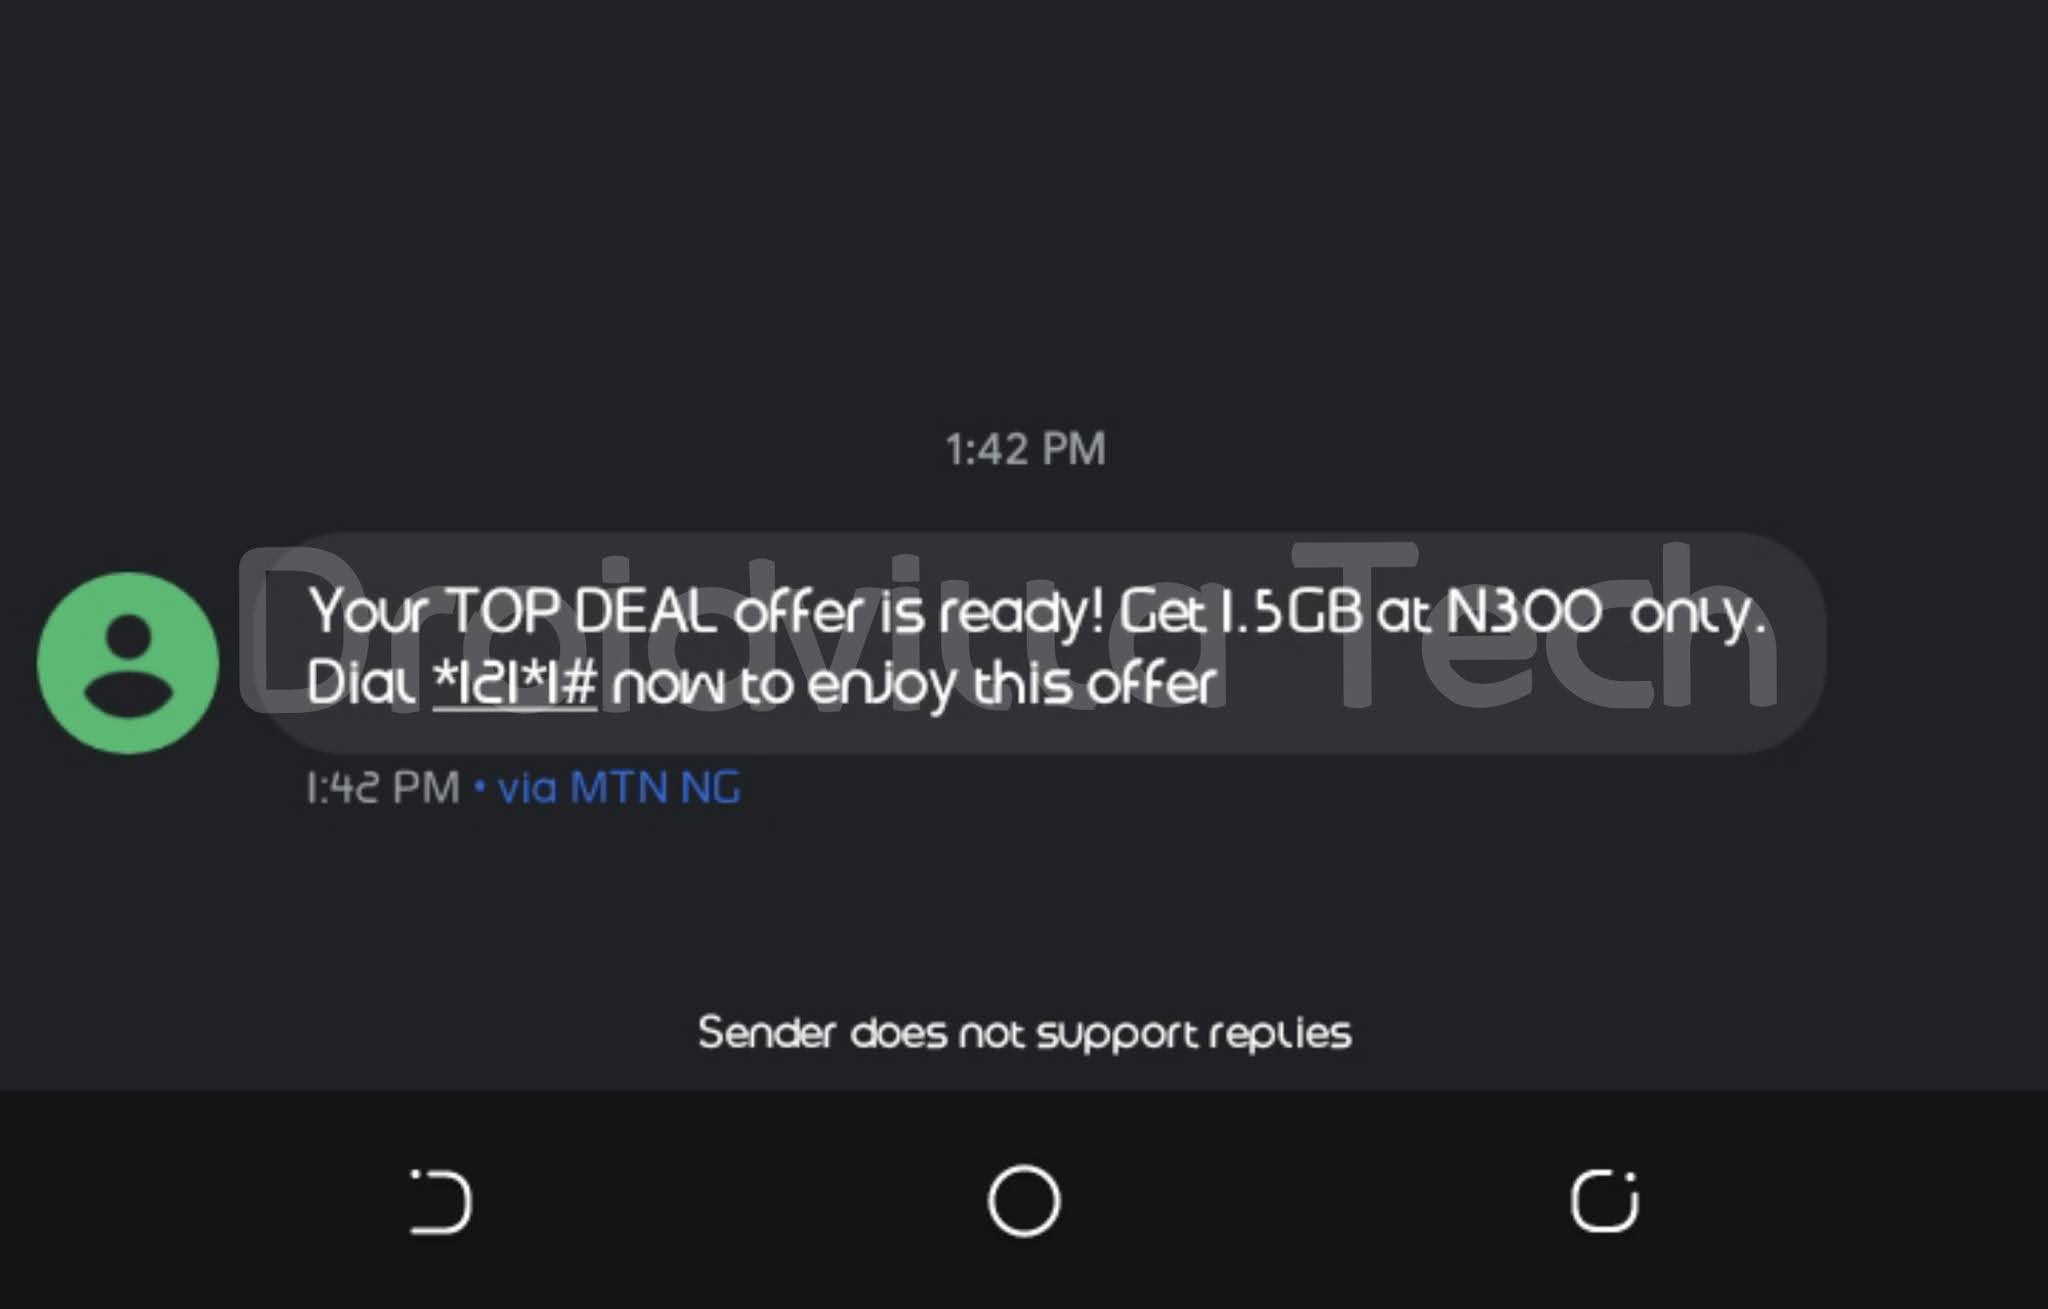 How To Subscribe To MTN 1.5gb For N300 Valid For 7 Days 